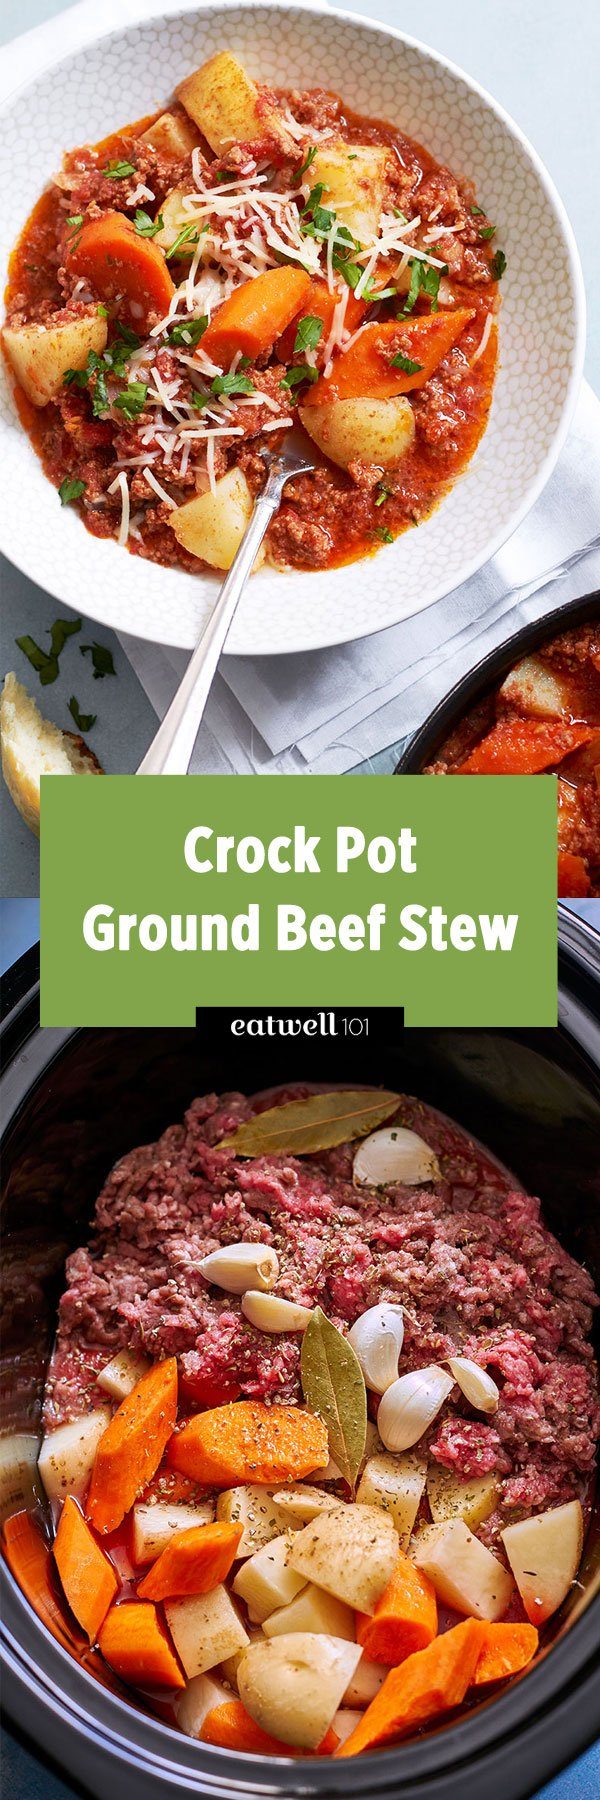 Crockpot Beef Stew Recipe - #crockpot #beef #recipe #eatwell101 - This Crock Pot Ground Beef Stew, Potato, and Carrot for a filling dinner, yet easy on your waistline.